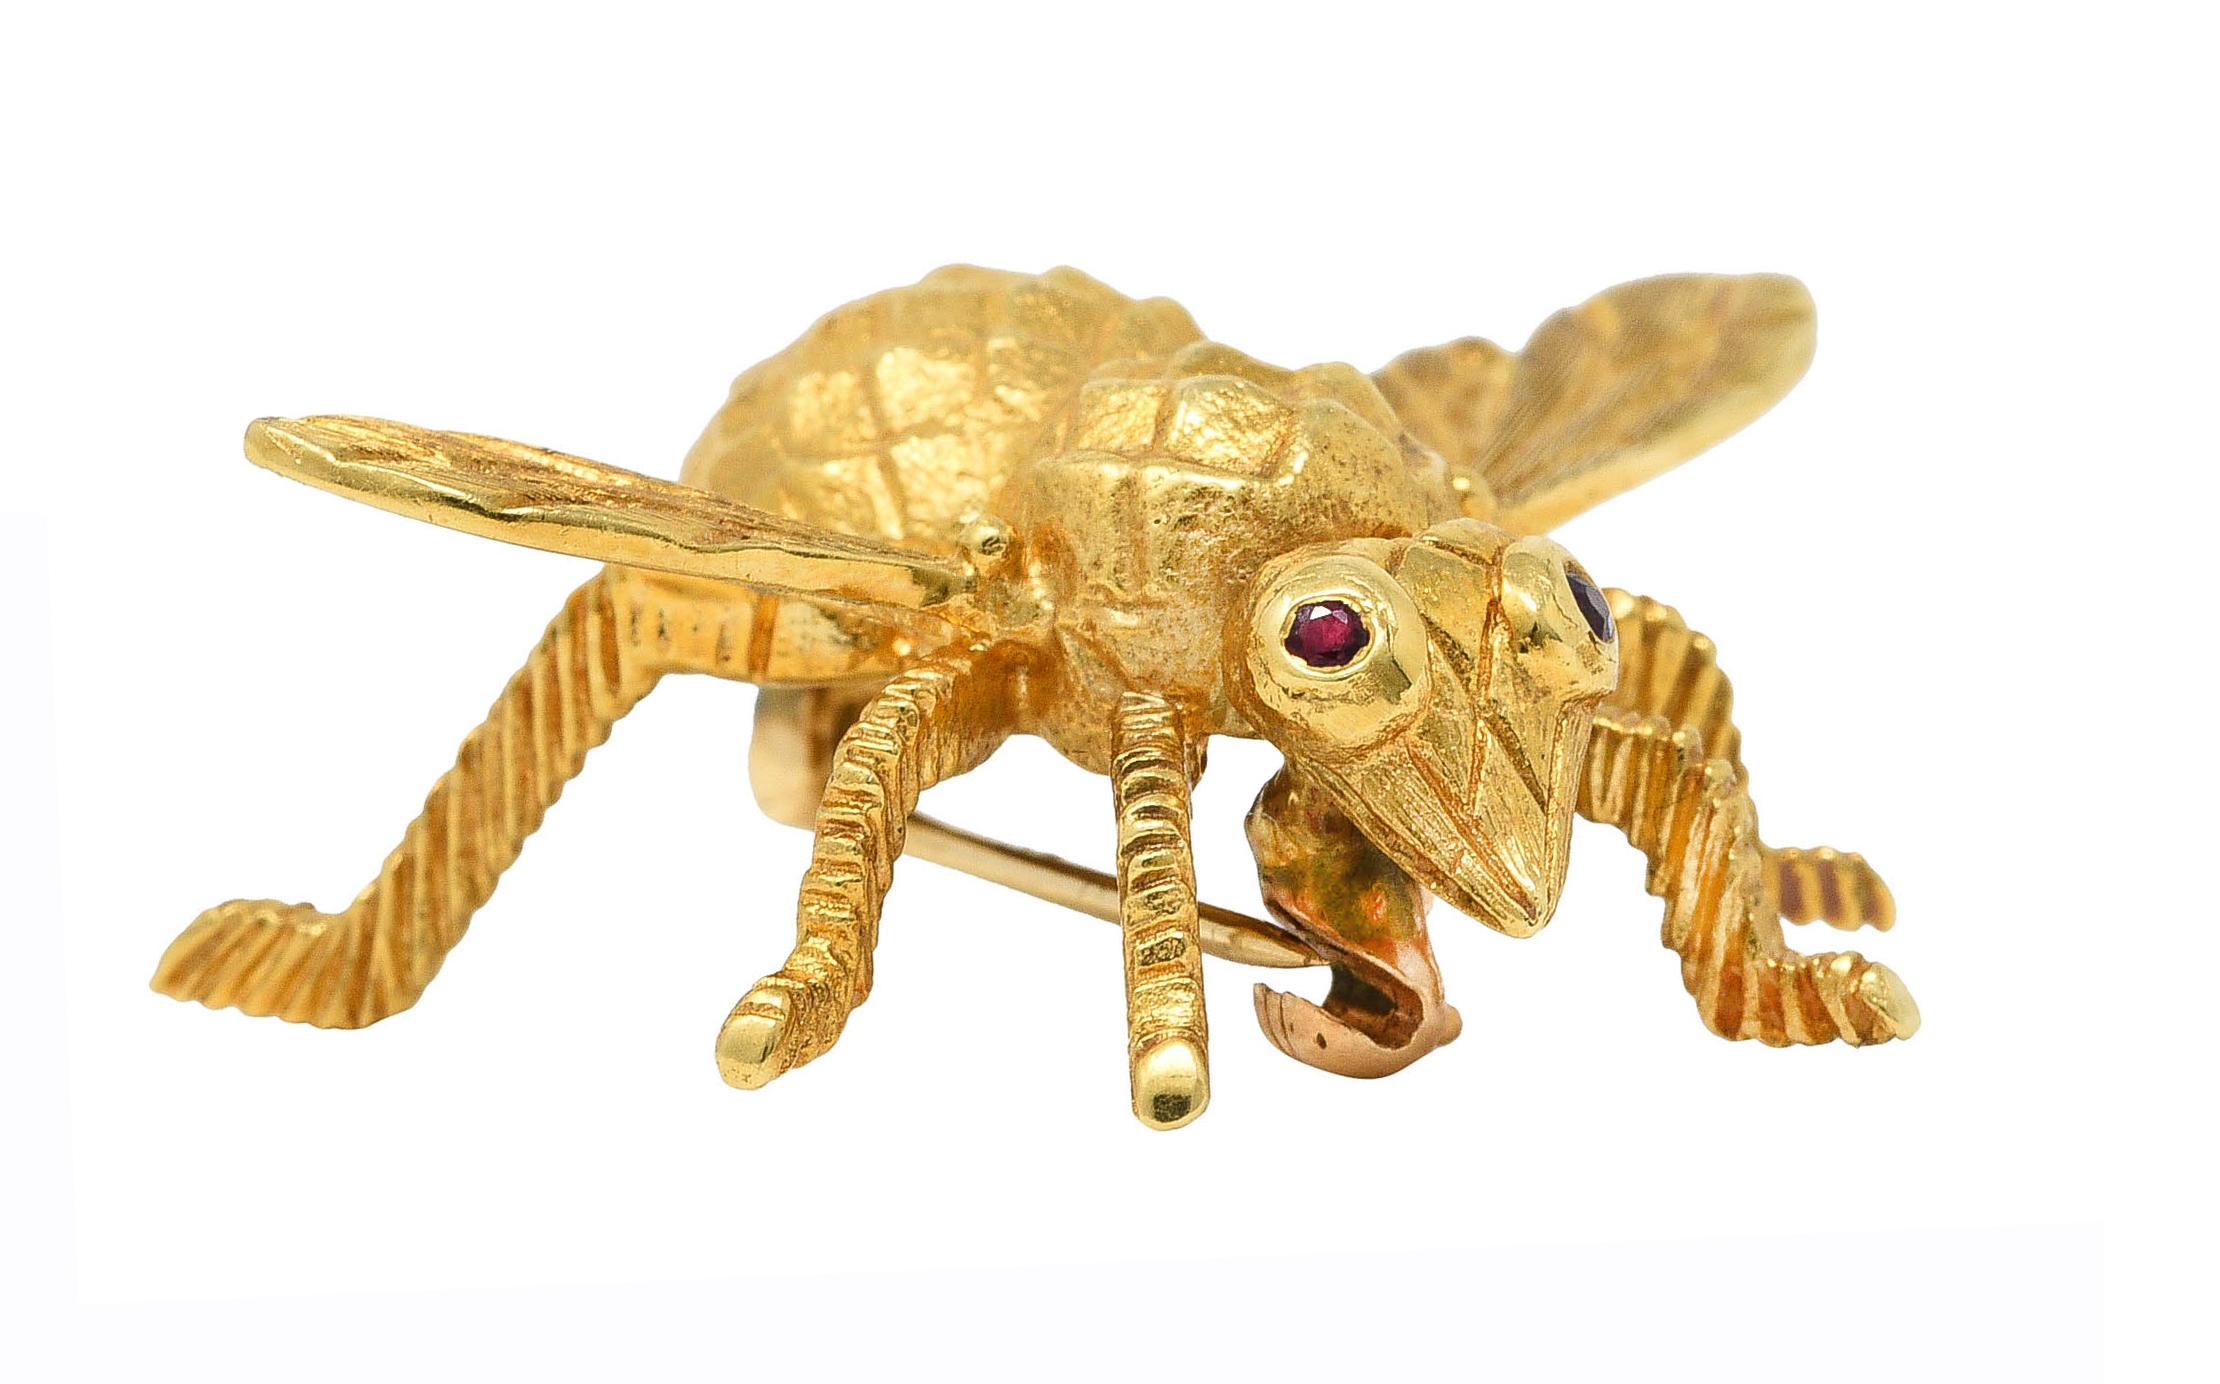 Brooch is designed as a stylized bug with textured body and engraved patterned wings

Accented by flush set round cut ruby eyes - transparent medium red in color

Completed by hinged pinstem with locking closure

Stamped 18k for 18 karat gold

With